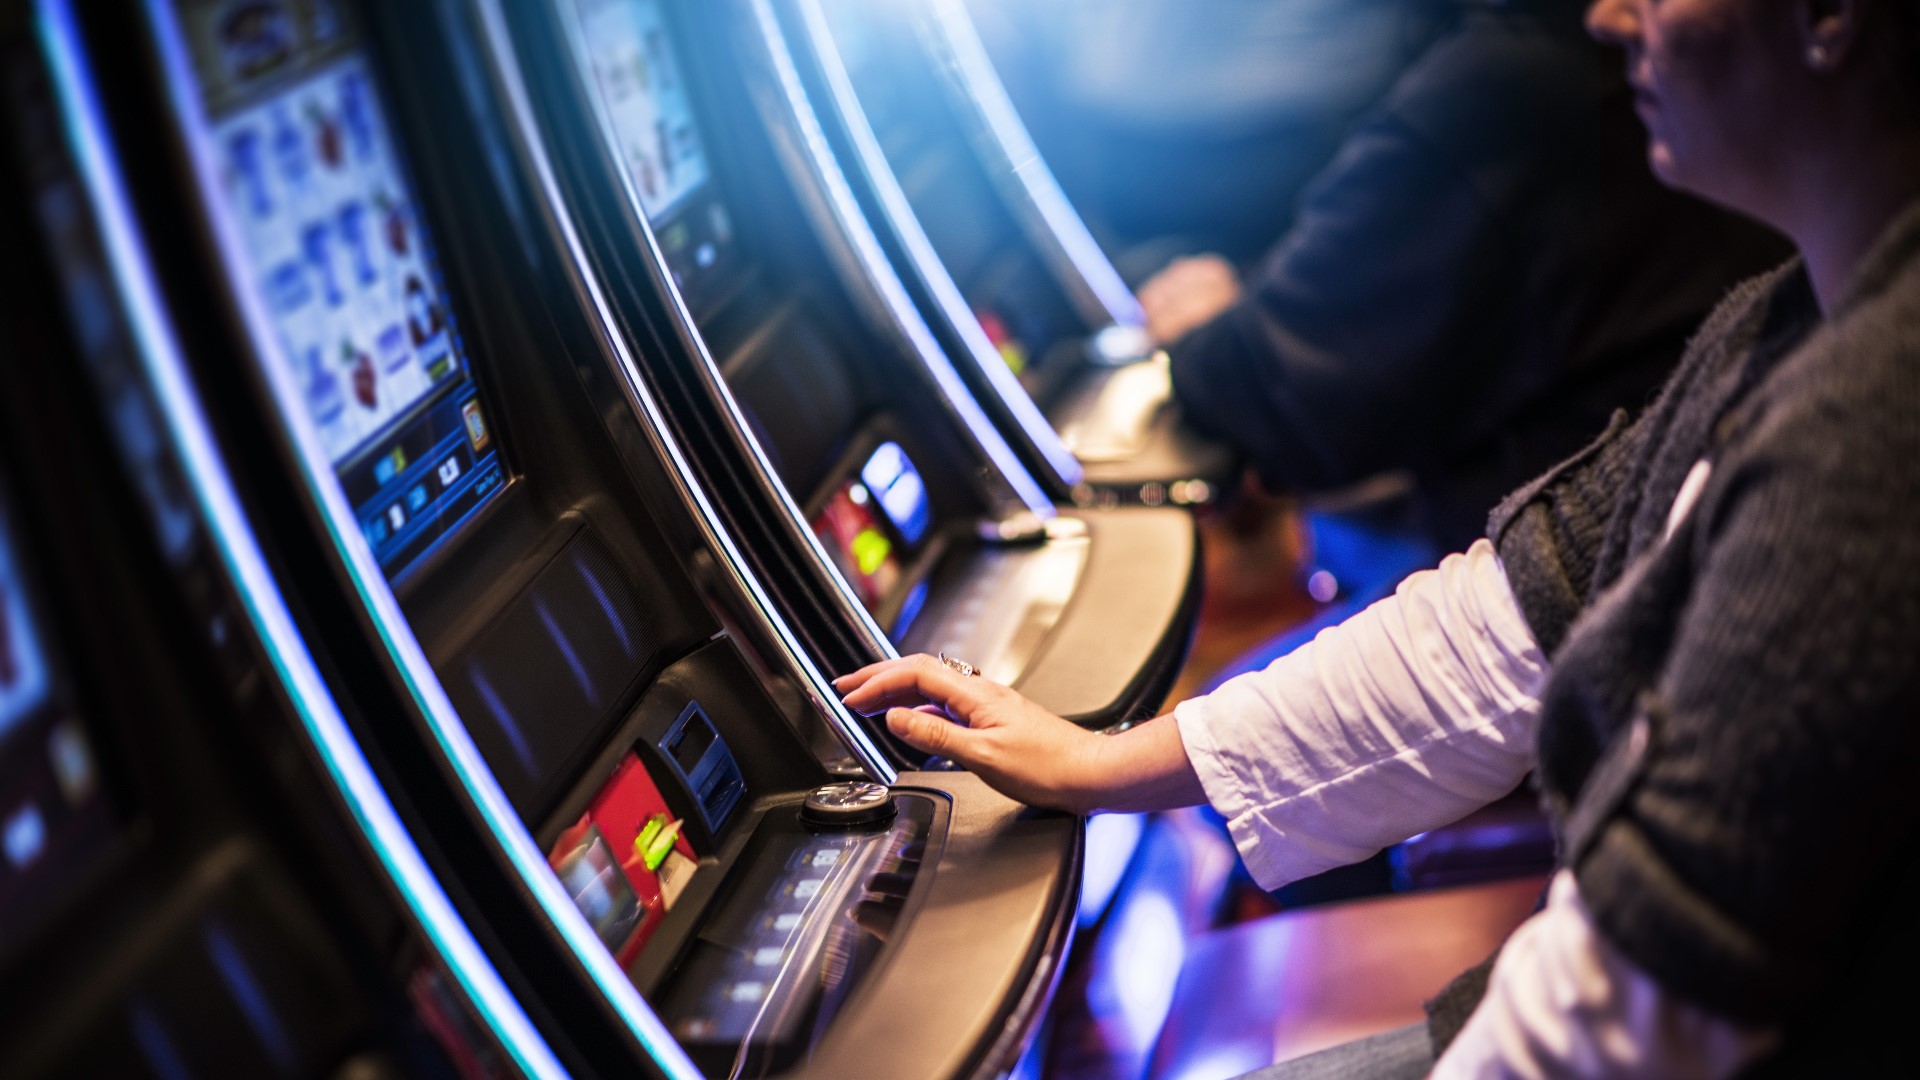 The California Gaming Association sent a letter to Gov. Gavin Newsom urging him to step in and order all casinos to close temporarily while cases continue to rise.